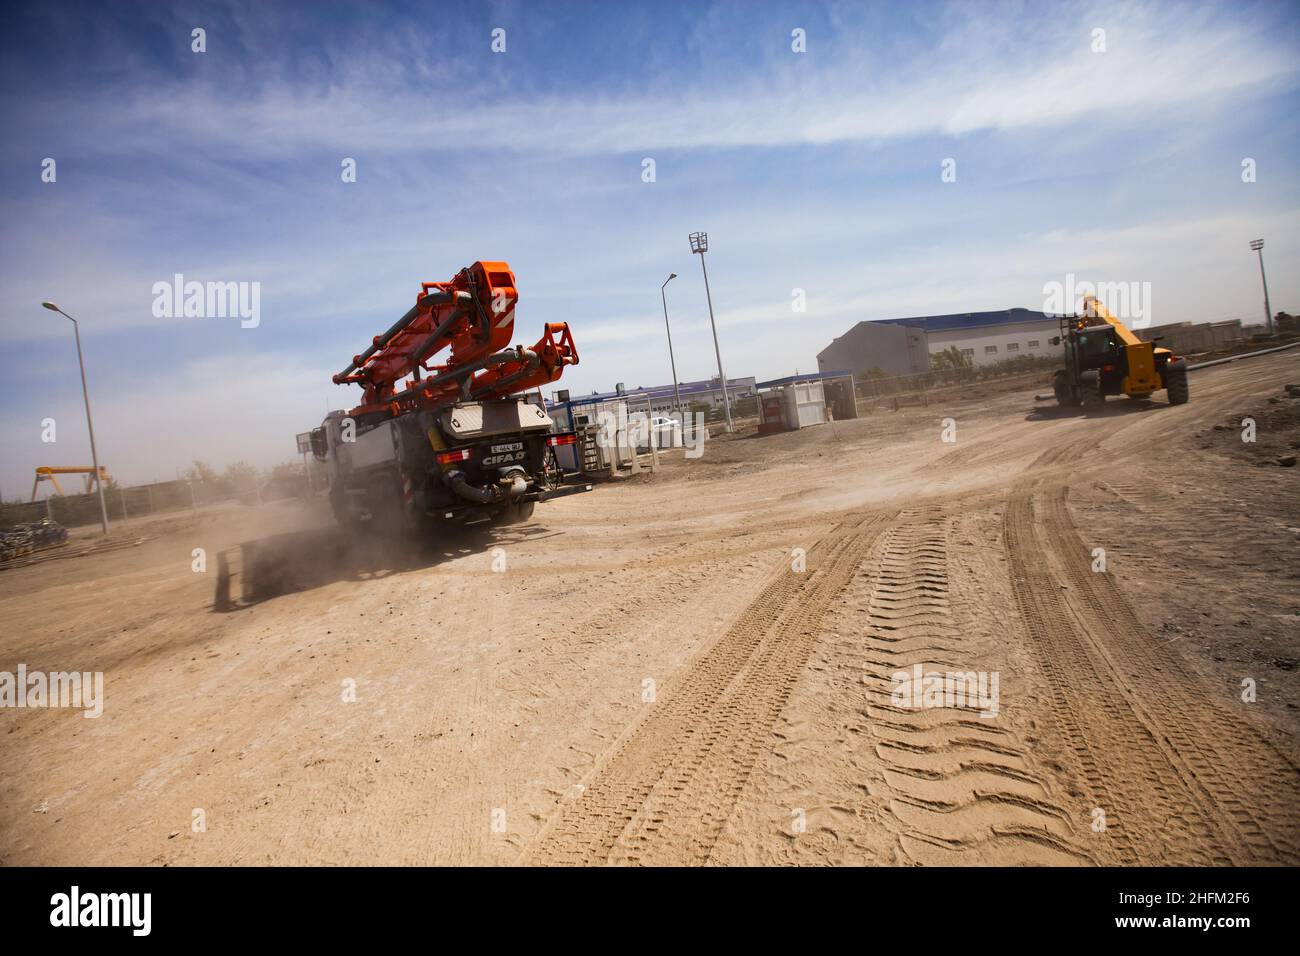 Two mobile cranes on desert dusty road. Truck tracks on foreground. Blue sky, clouds background. Stock Photo